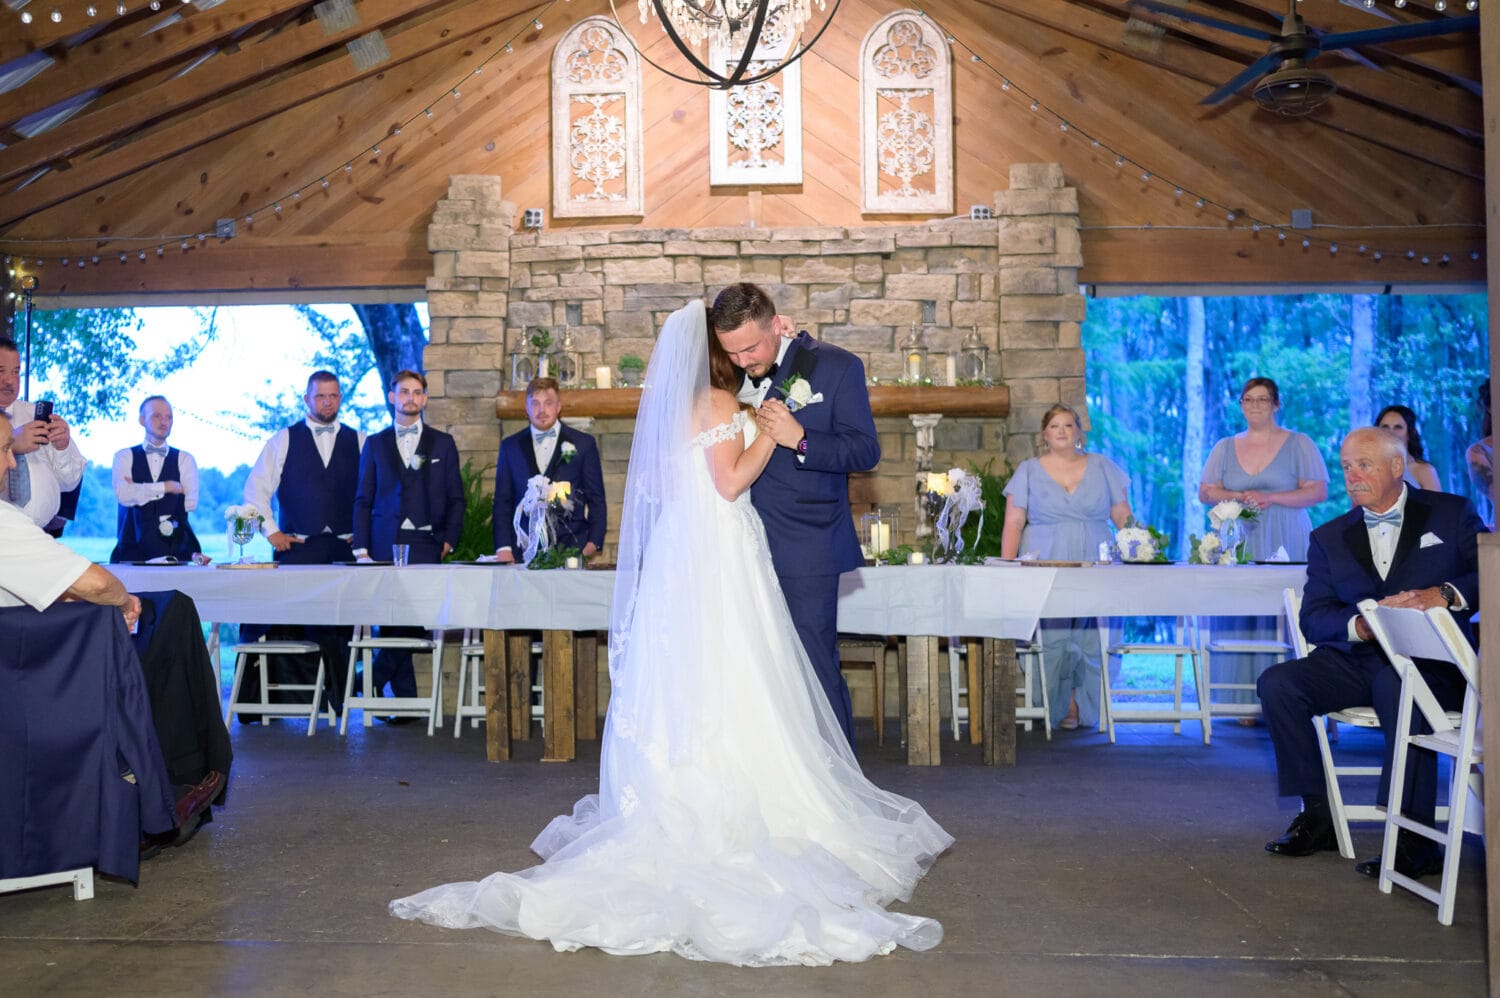 First dance - Wildhorse at Parker Farms